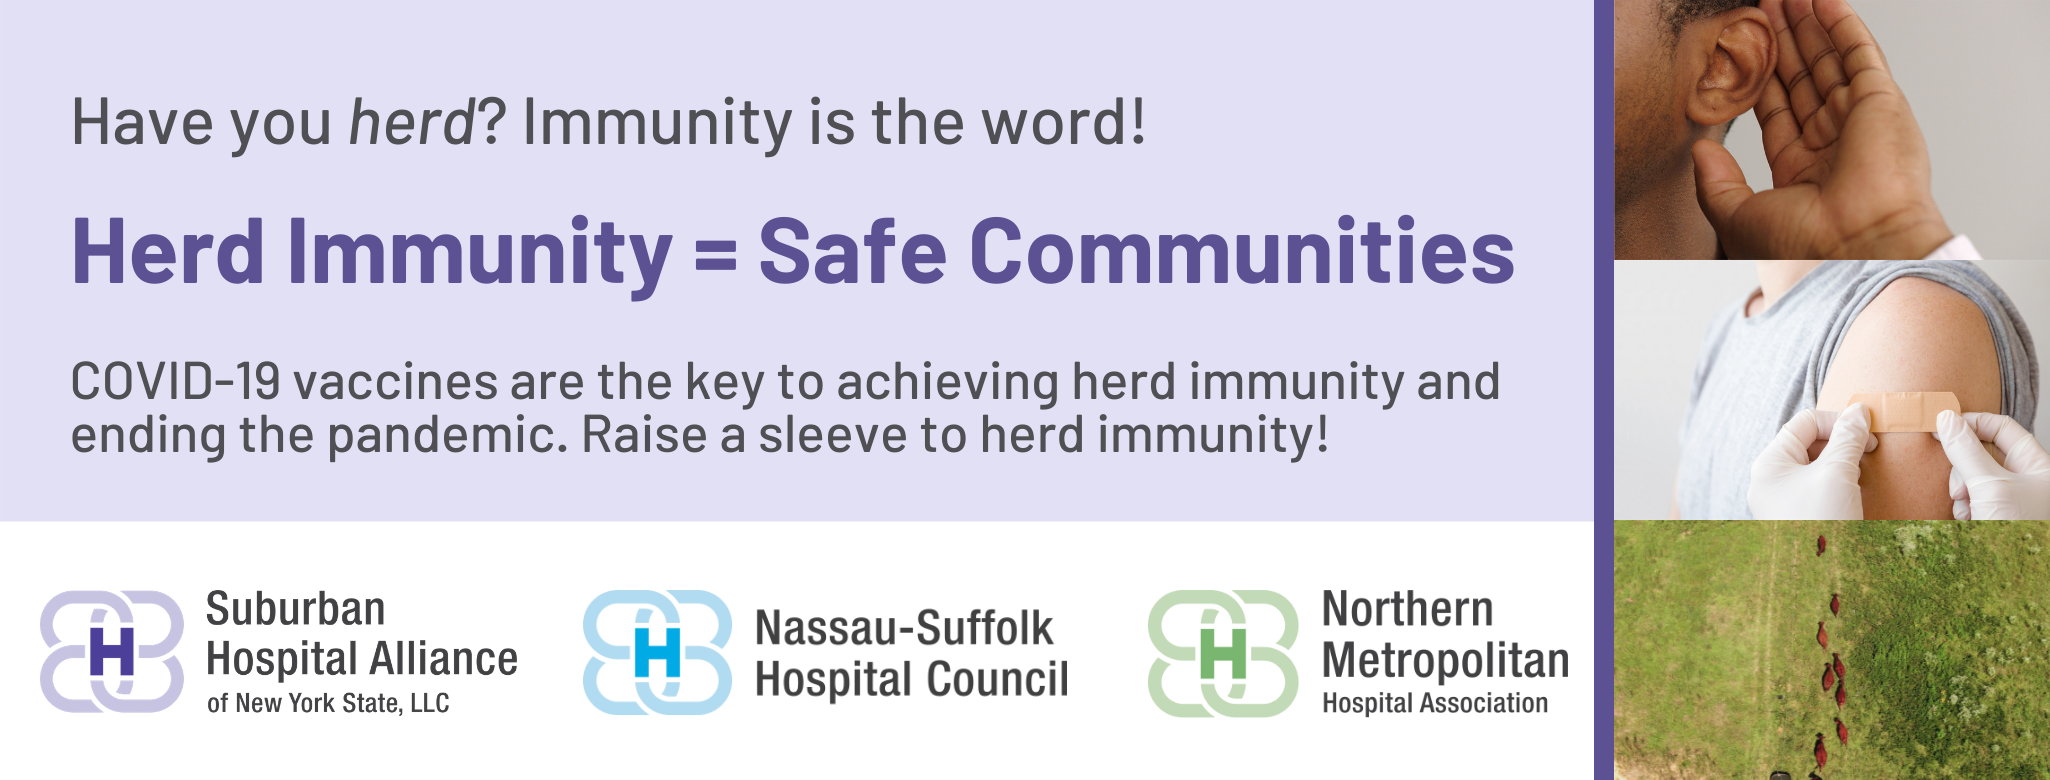 Have you herd? Immunity is the word!